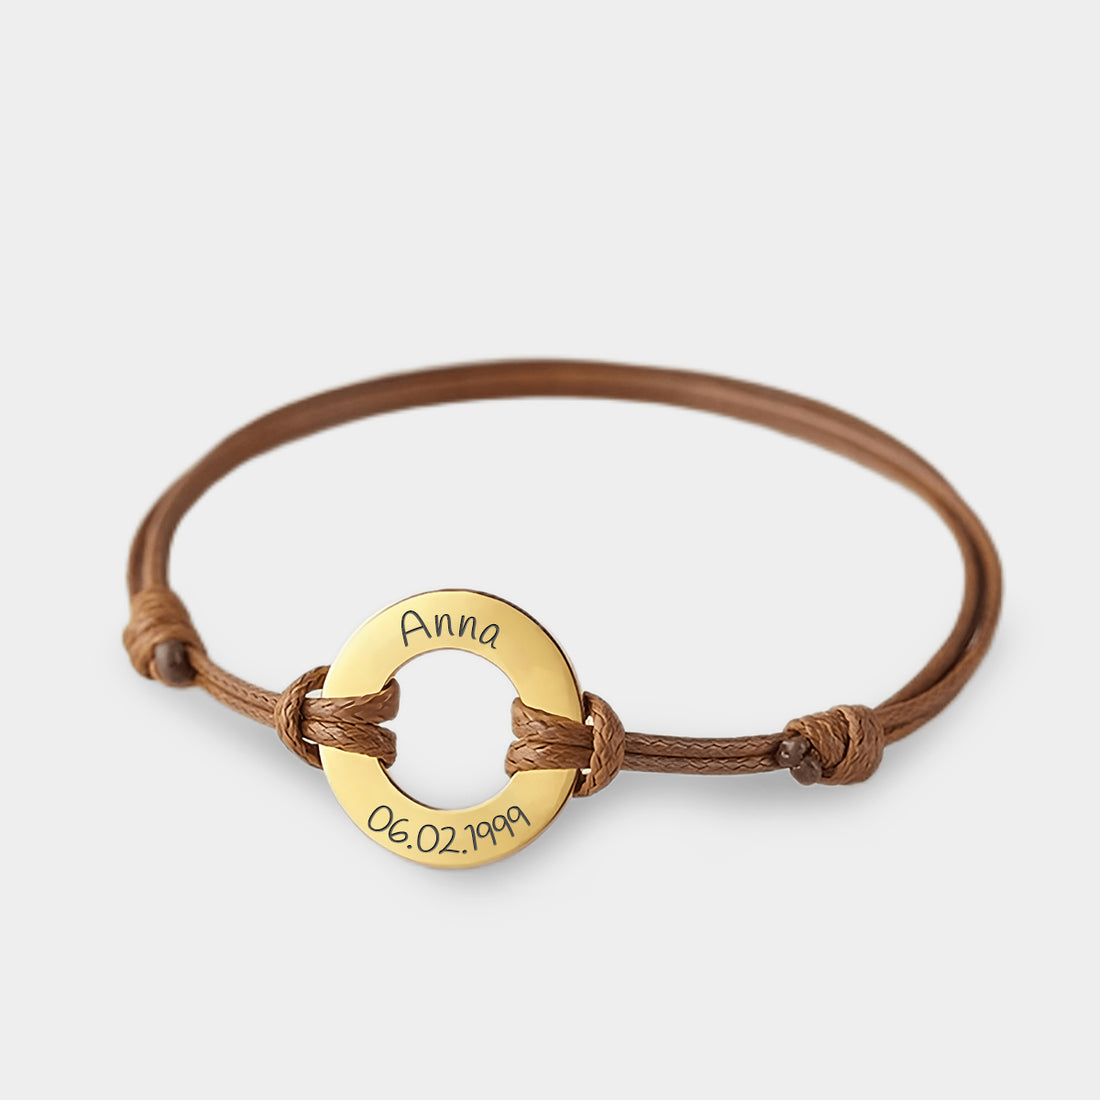 Personalized Leather Bracelet with Circle